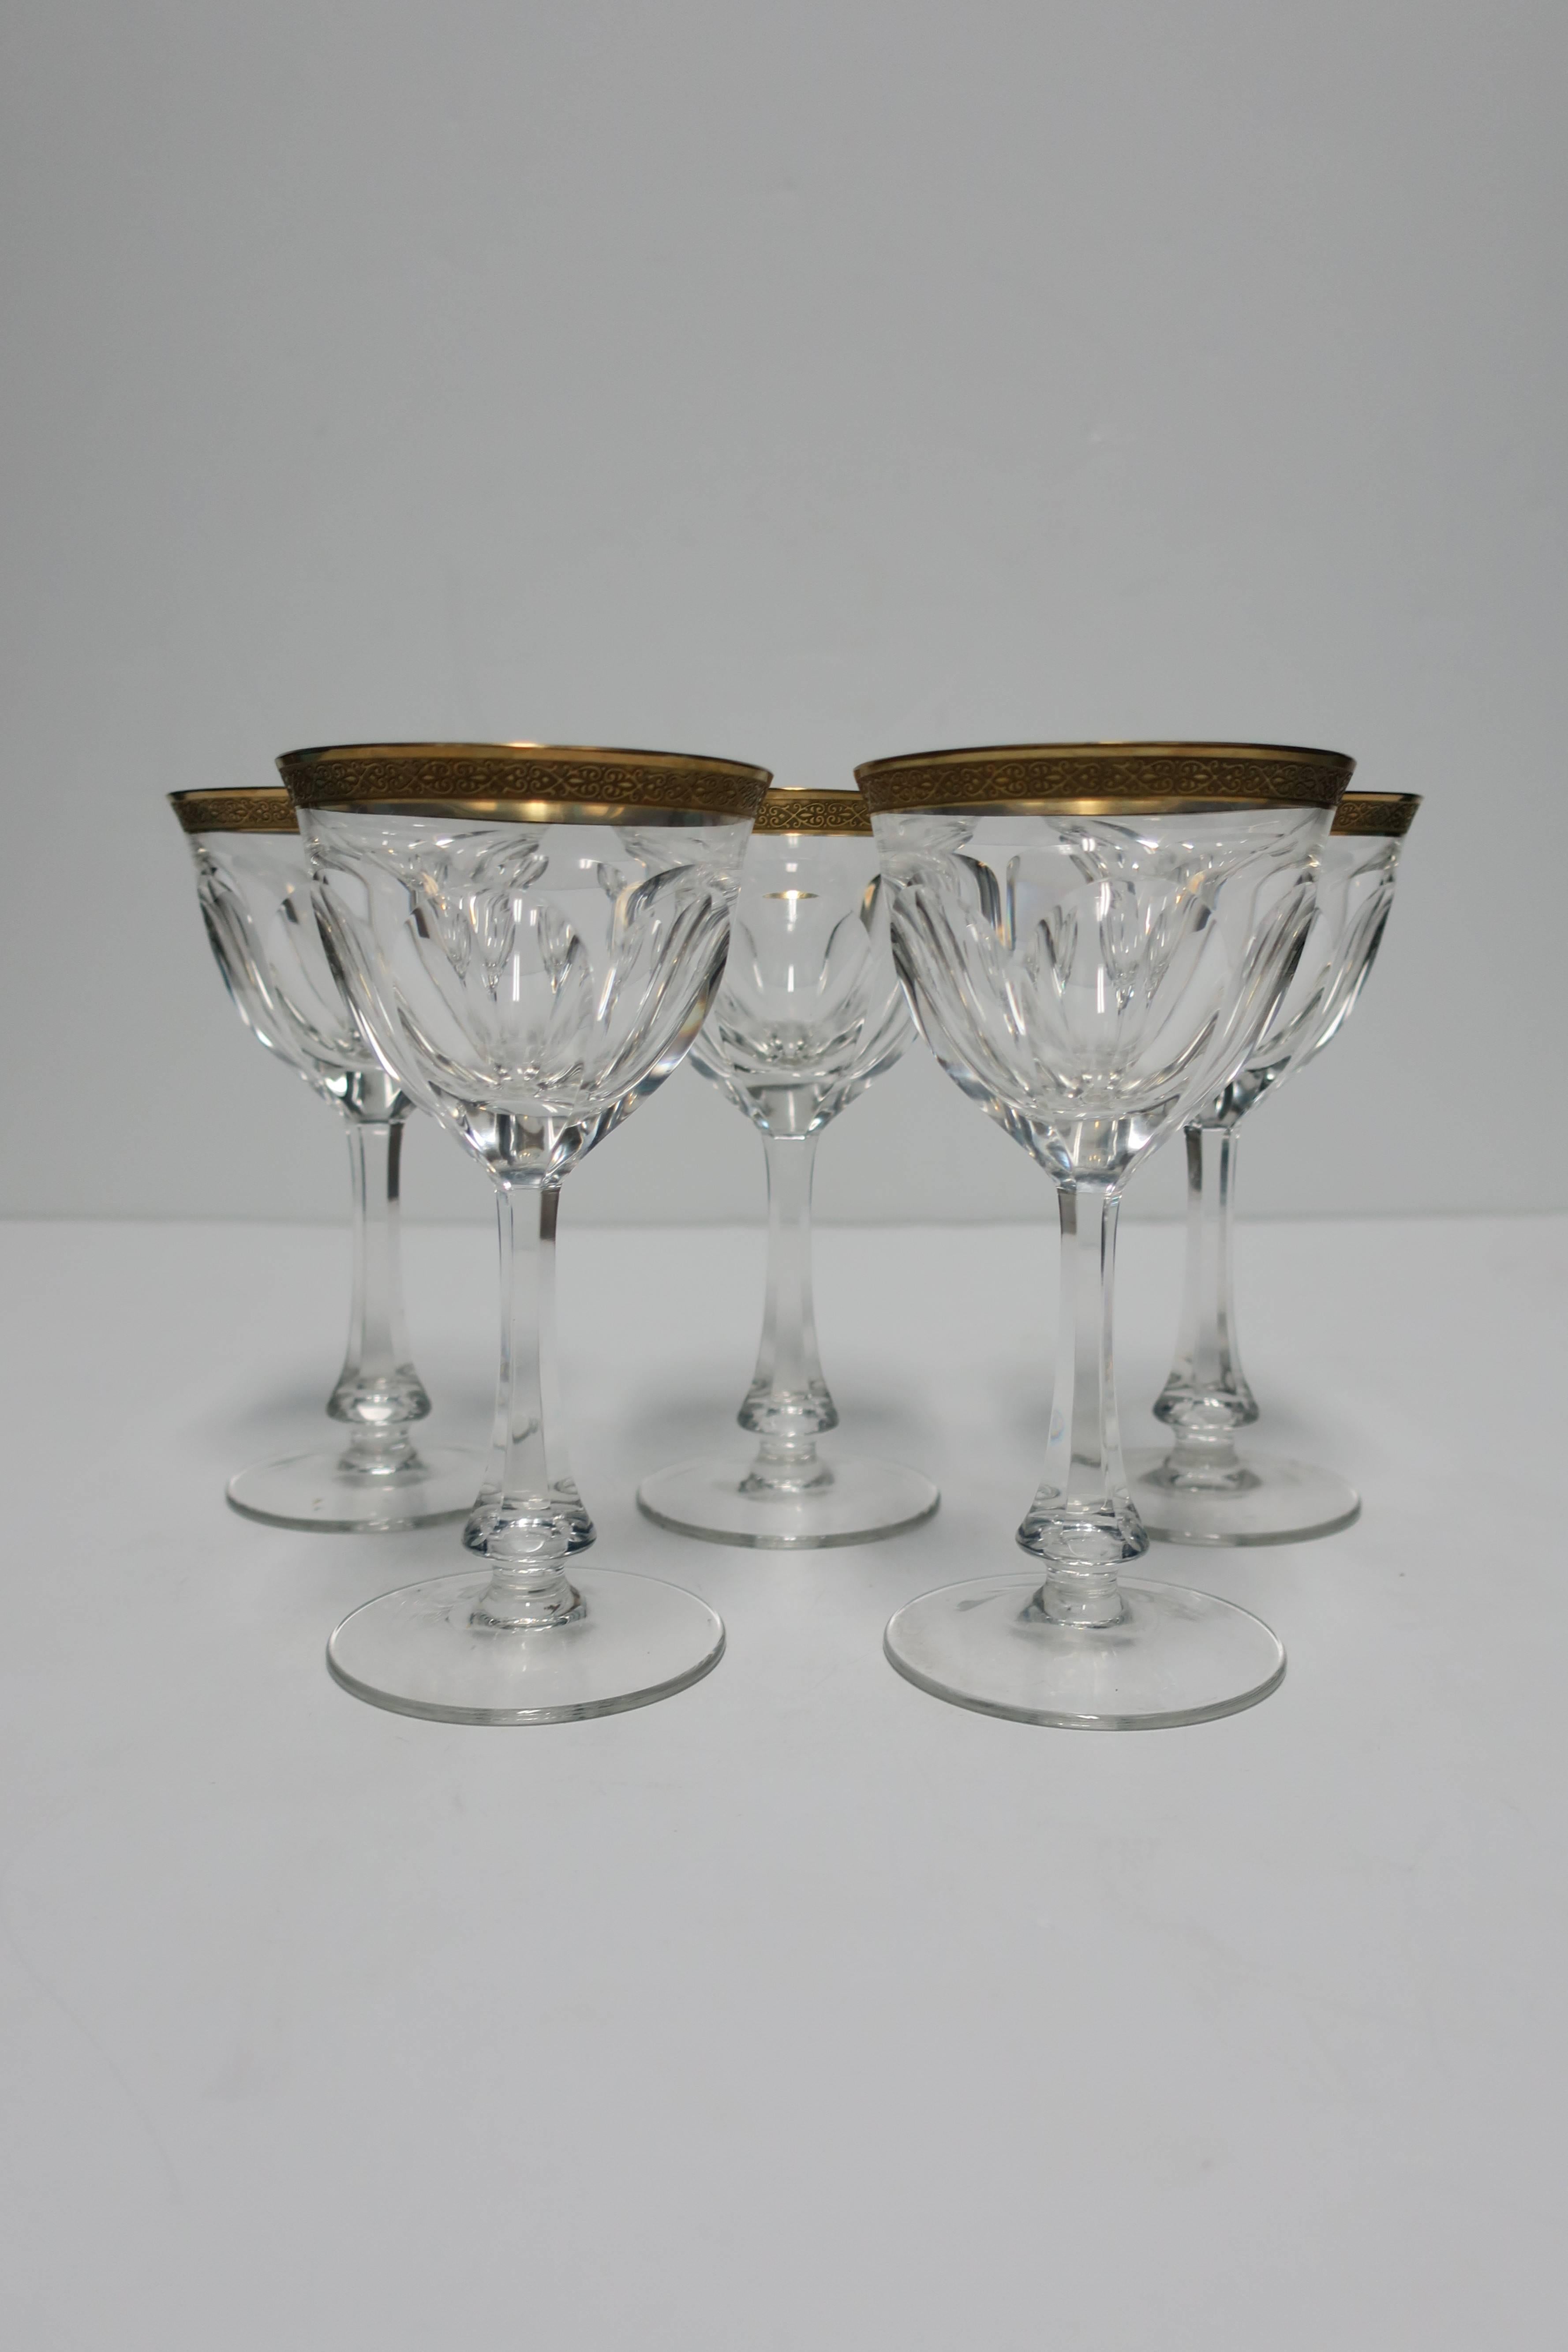 Gold Gilded Crystal Glasses in the Style of Baccarat 4